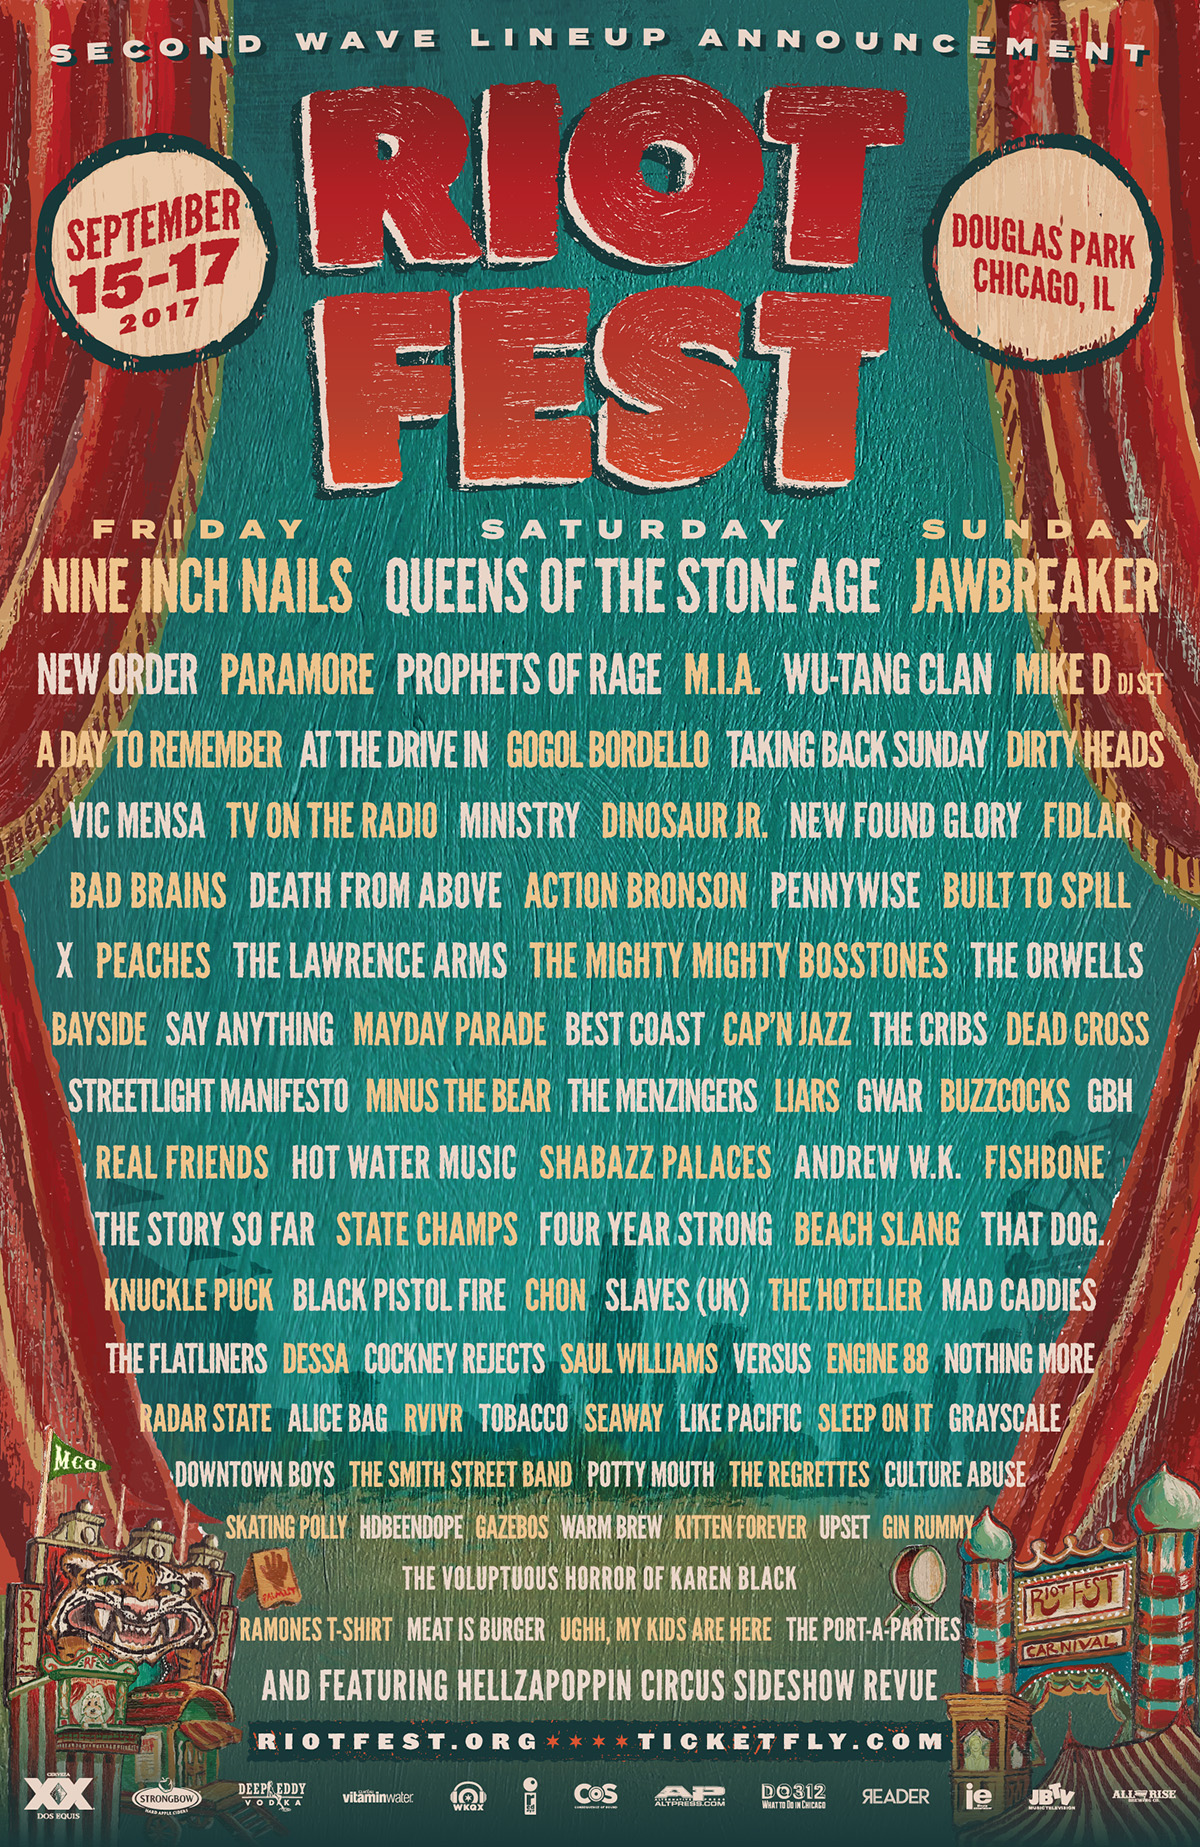 Atomisk Bliv ophidset tag The Second Wave of Riot Fest Lineup Announcements - Riot Fest 2023 –  September 15th-17th